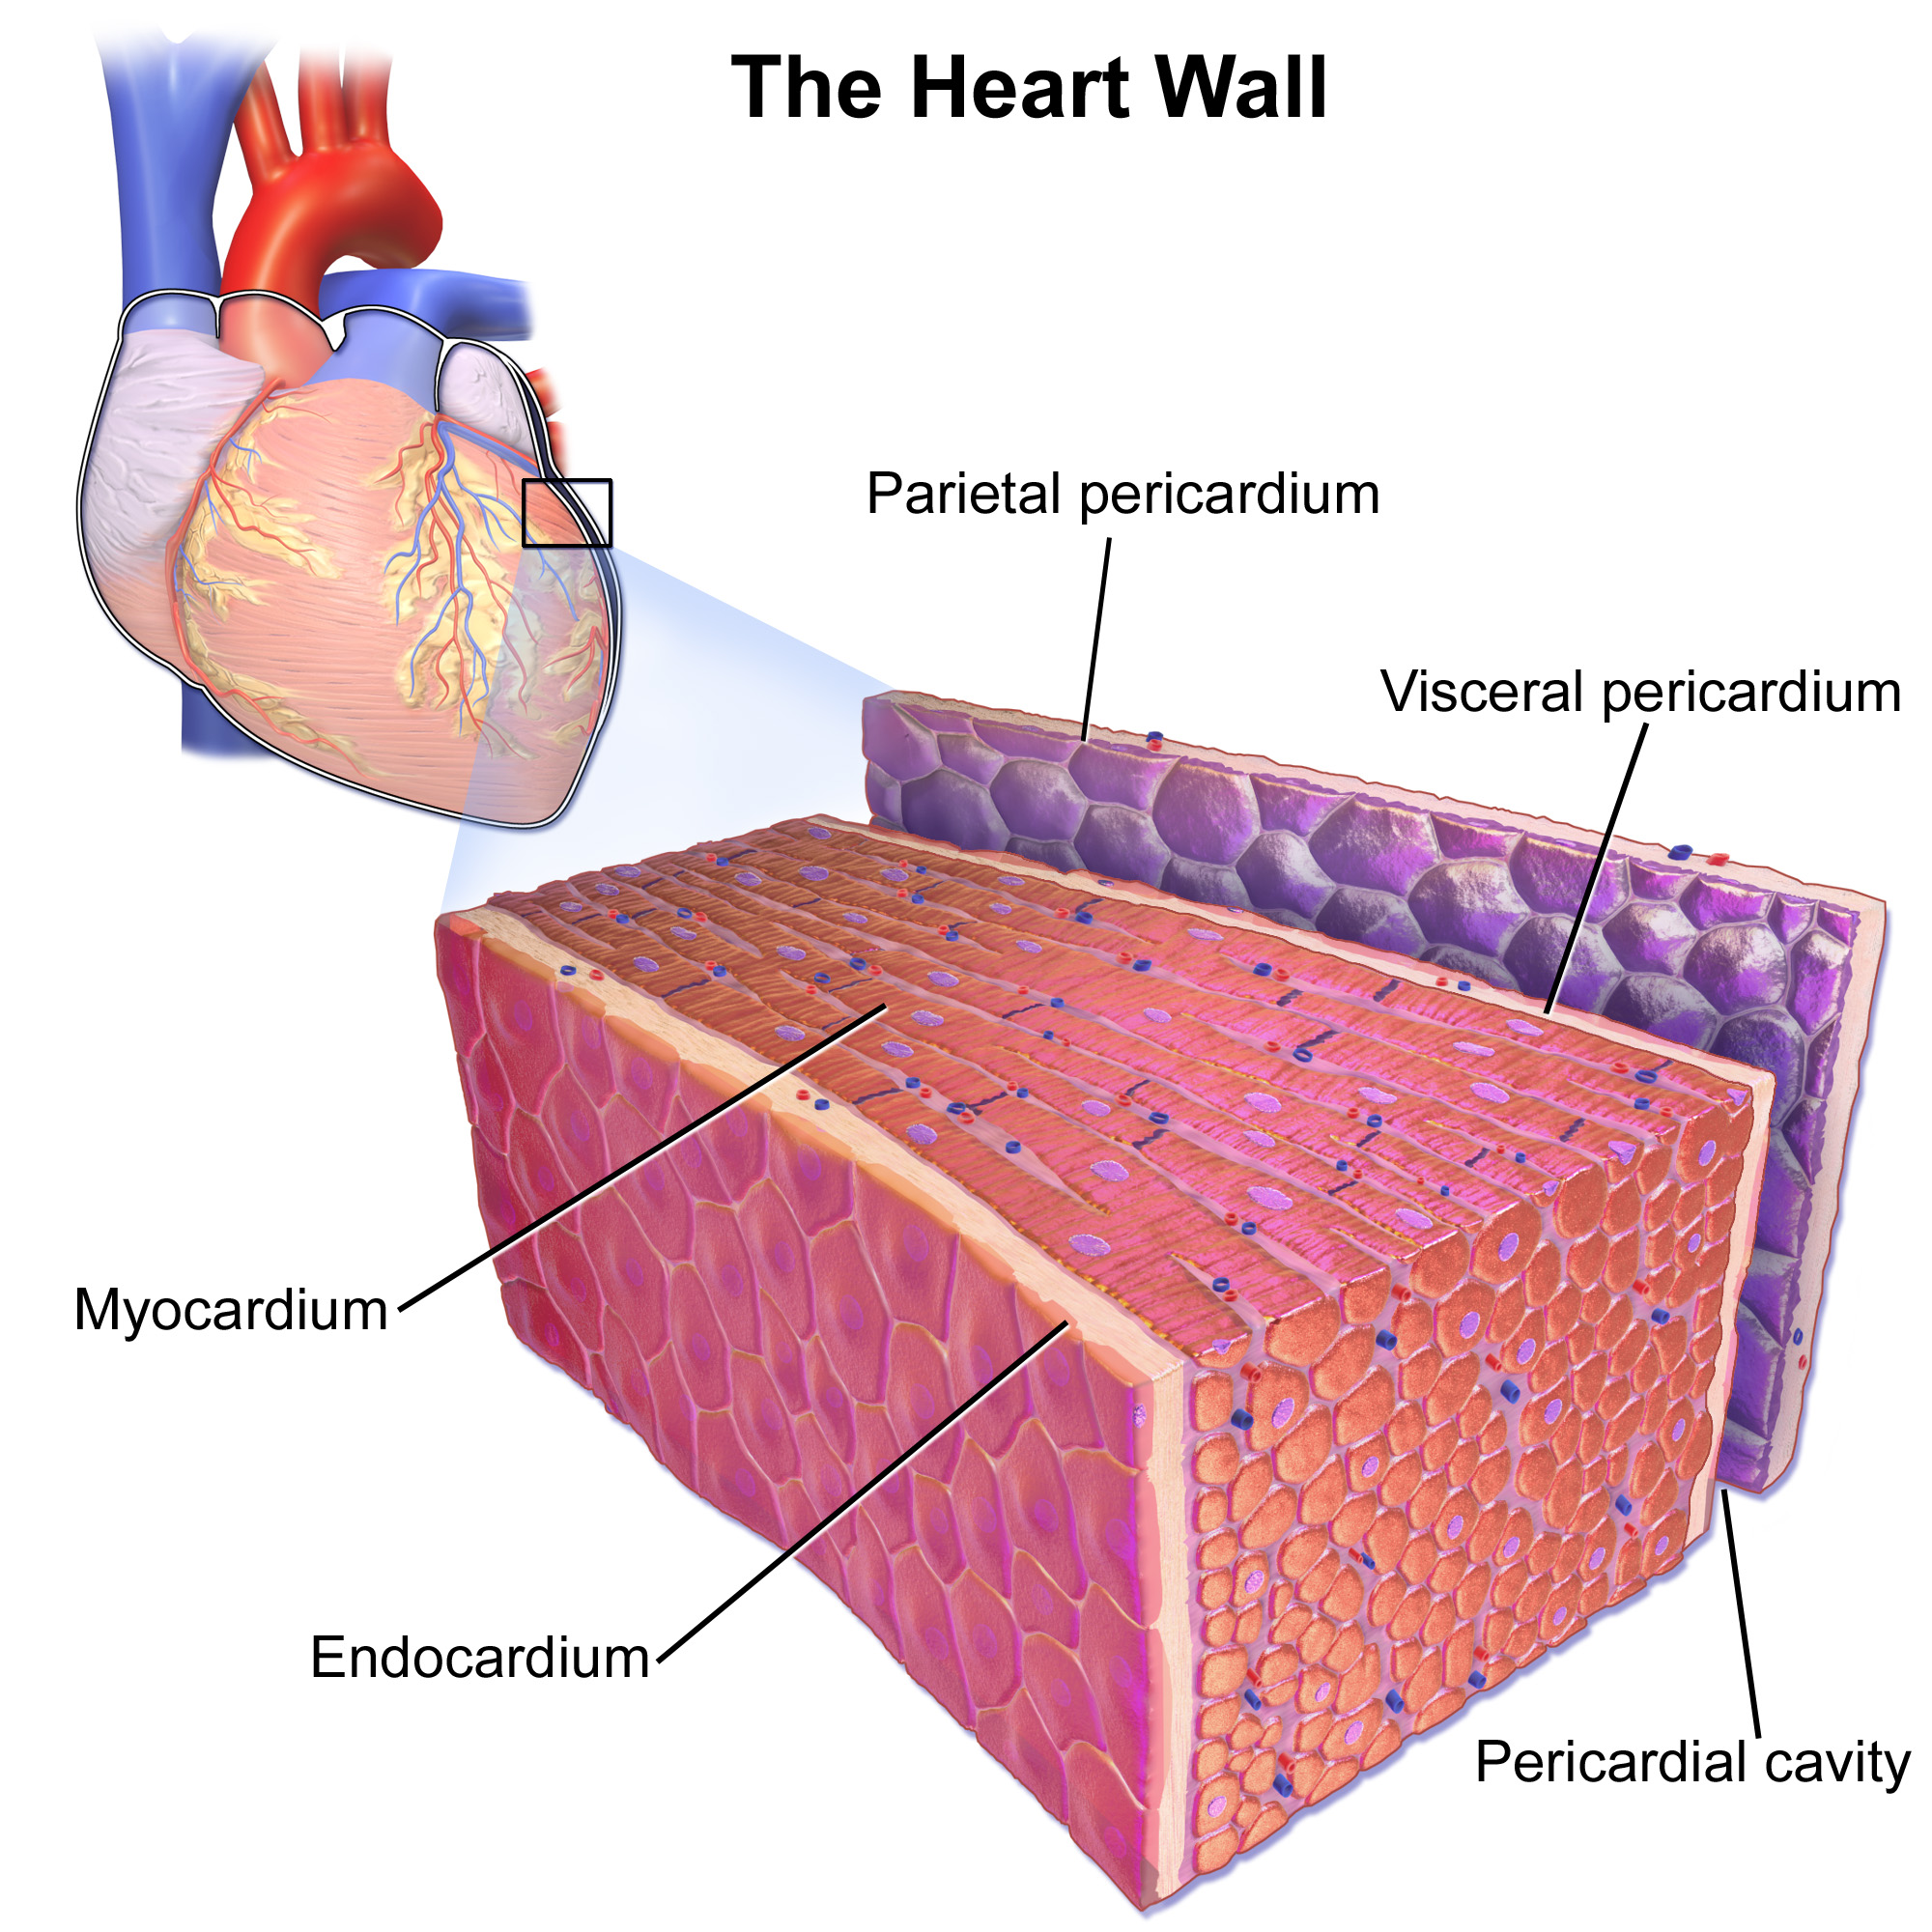 Layers of the Heart Wall. The pericardial membrane that surrounds the heart consists of three layers and the pericardial cavity. The heart wall also consists of three layers. The pericardial membrane and the heart wall share the epicardium.